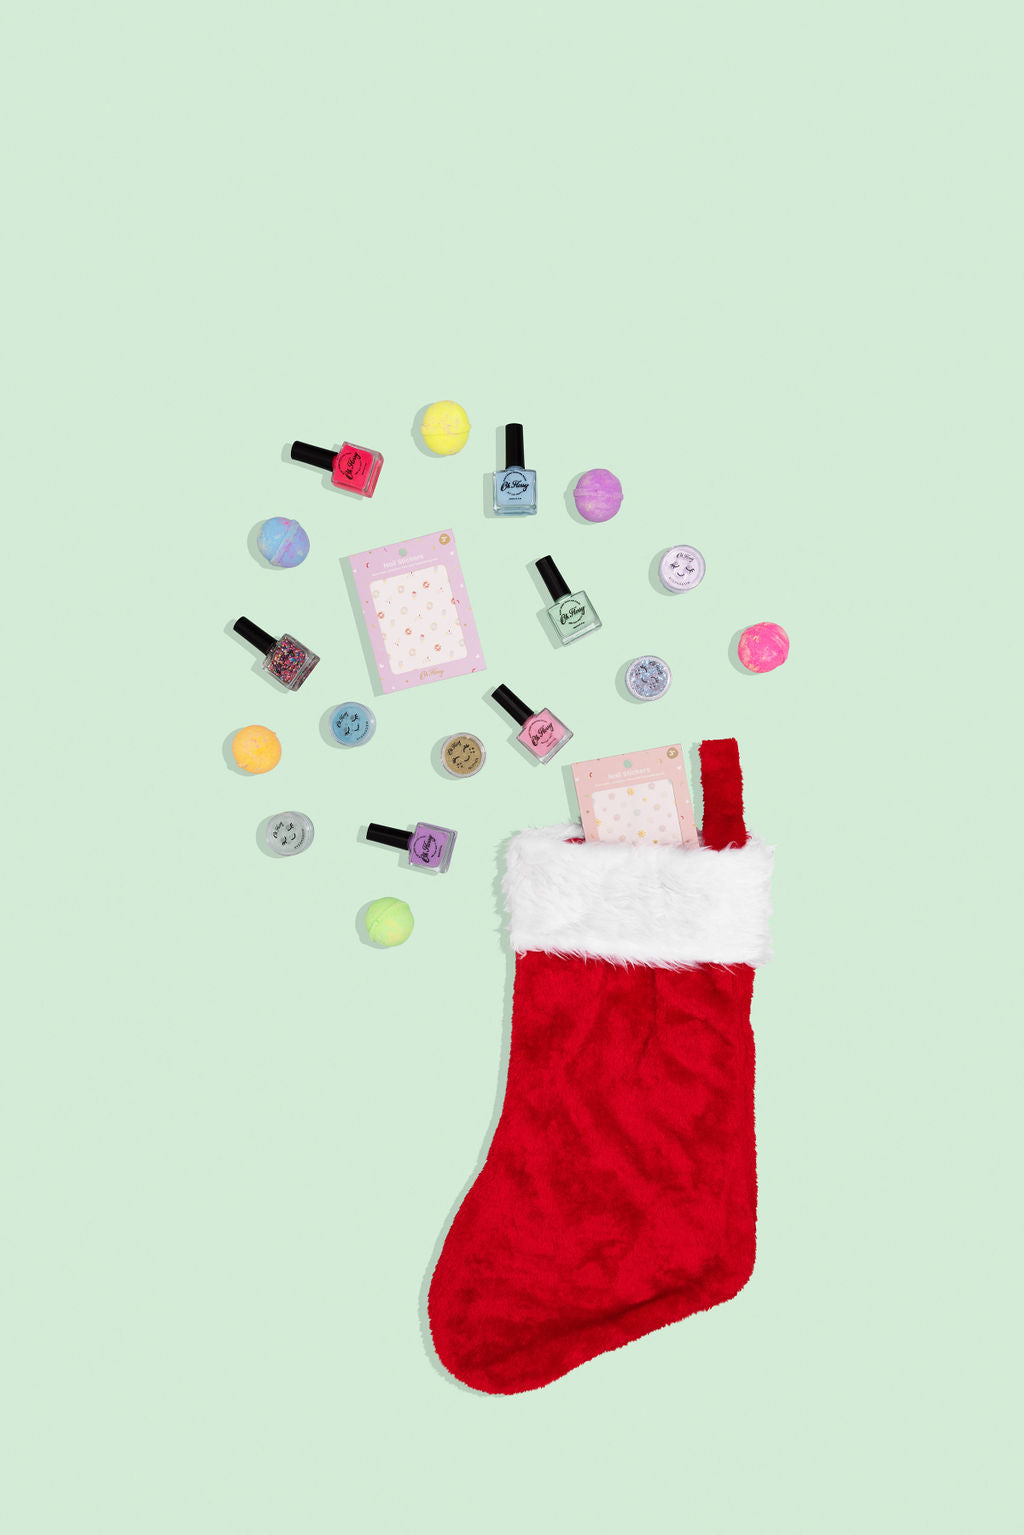 You’ll sleigh this Christmas with these gorgeous stocking stuffer ideas